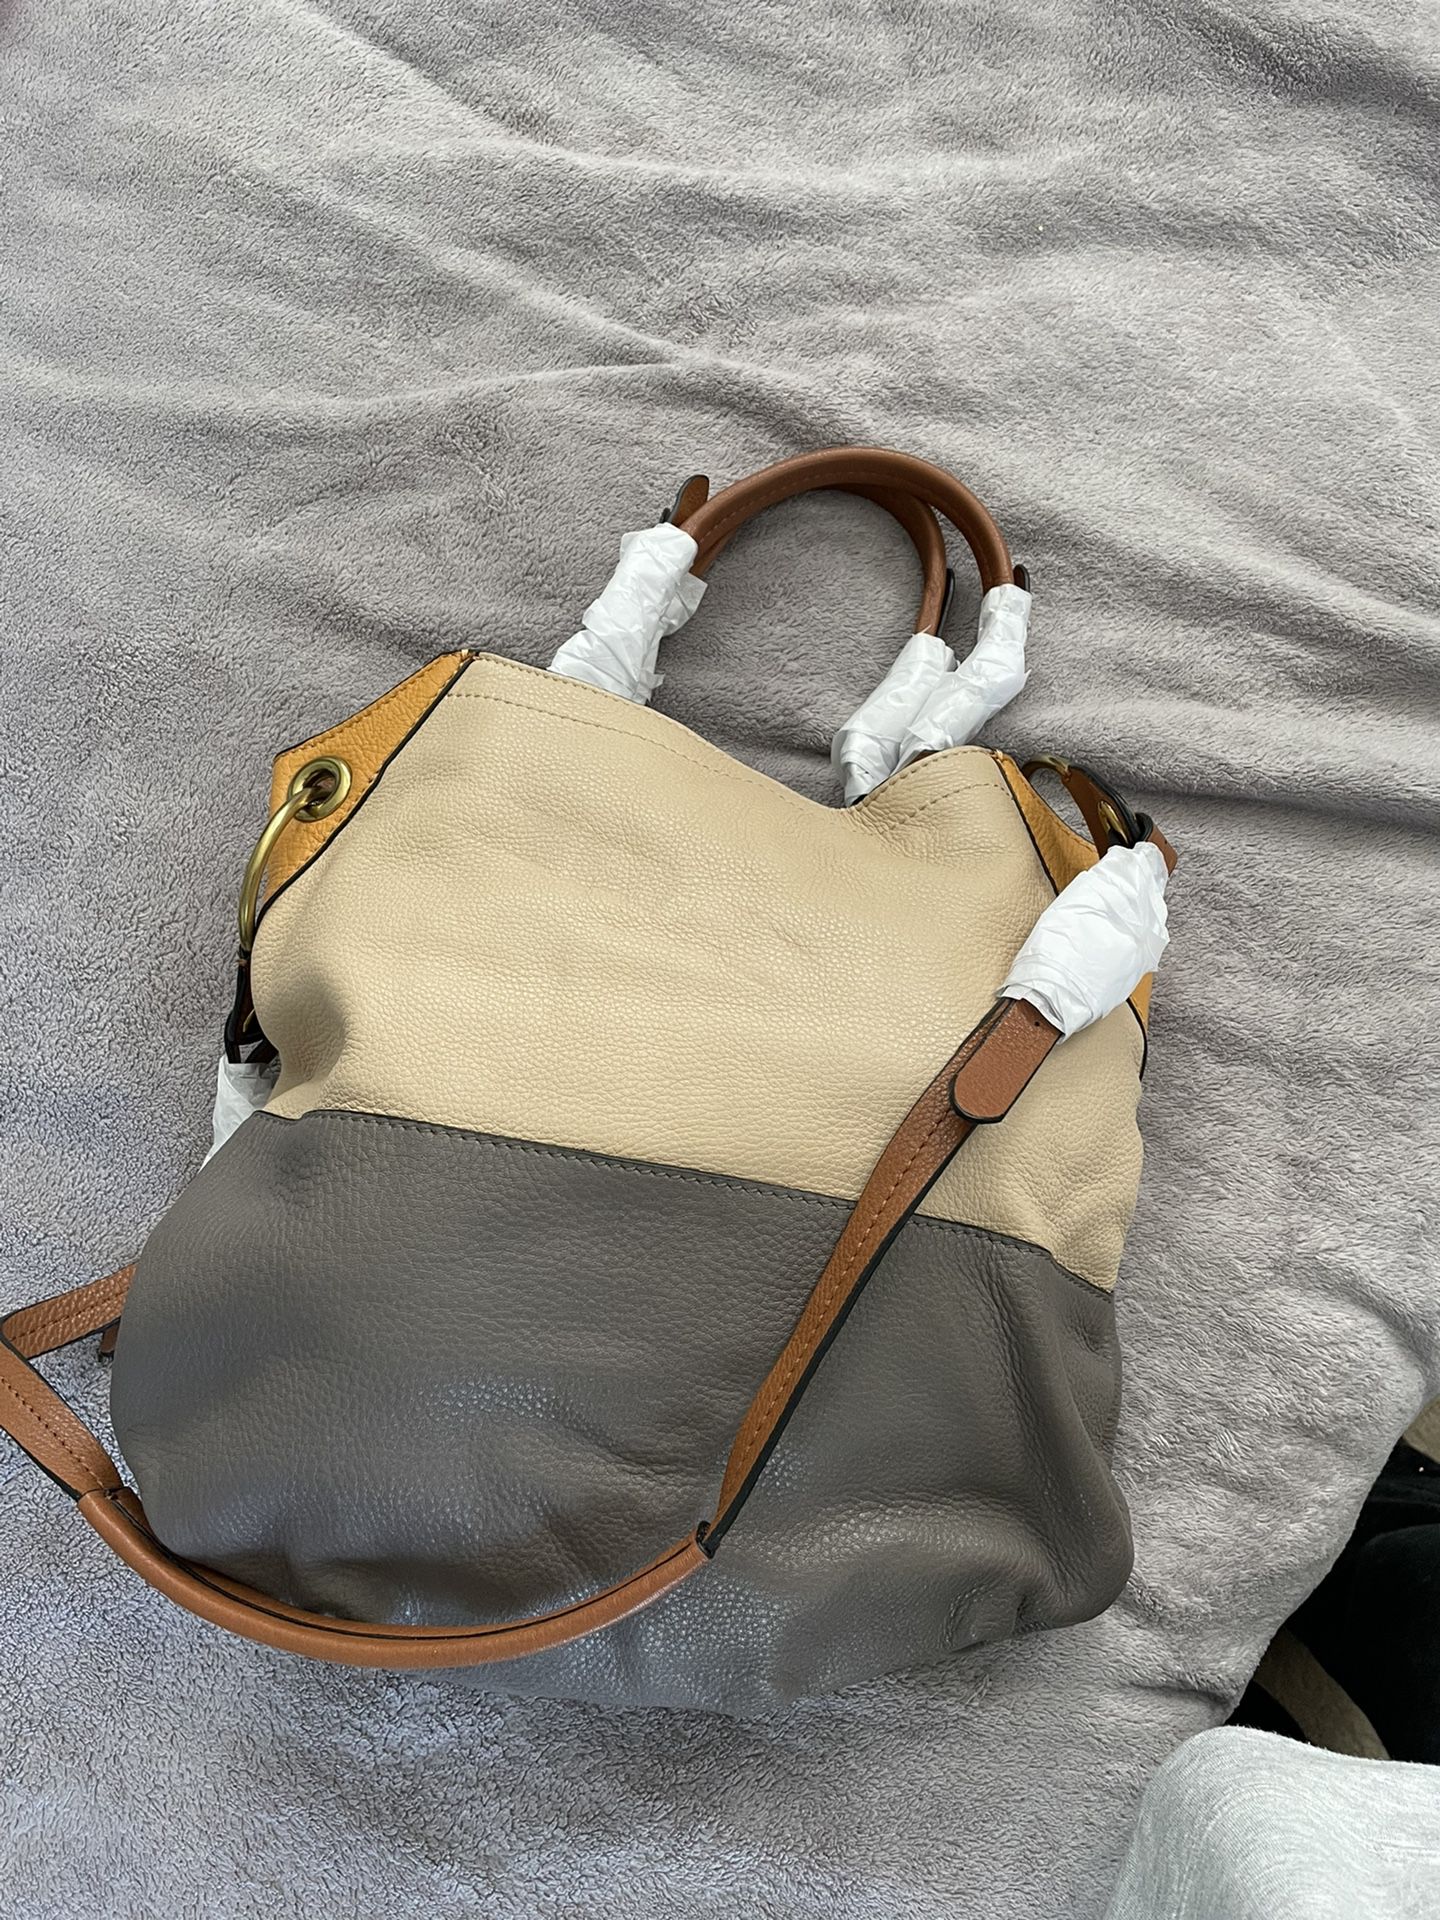 Almost New! Hard to Find! ORYANY Sydney Hobo Pebble Leather Color Block Bag w/ dust bag